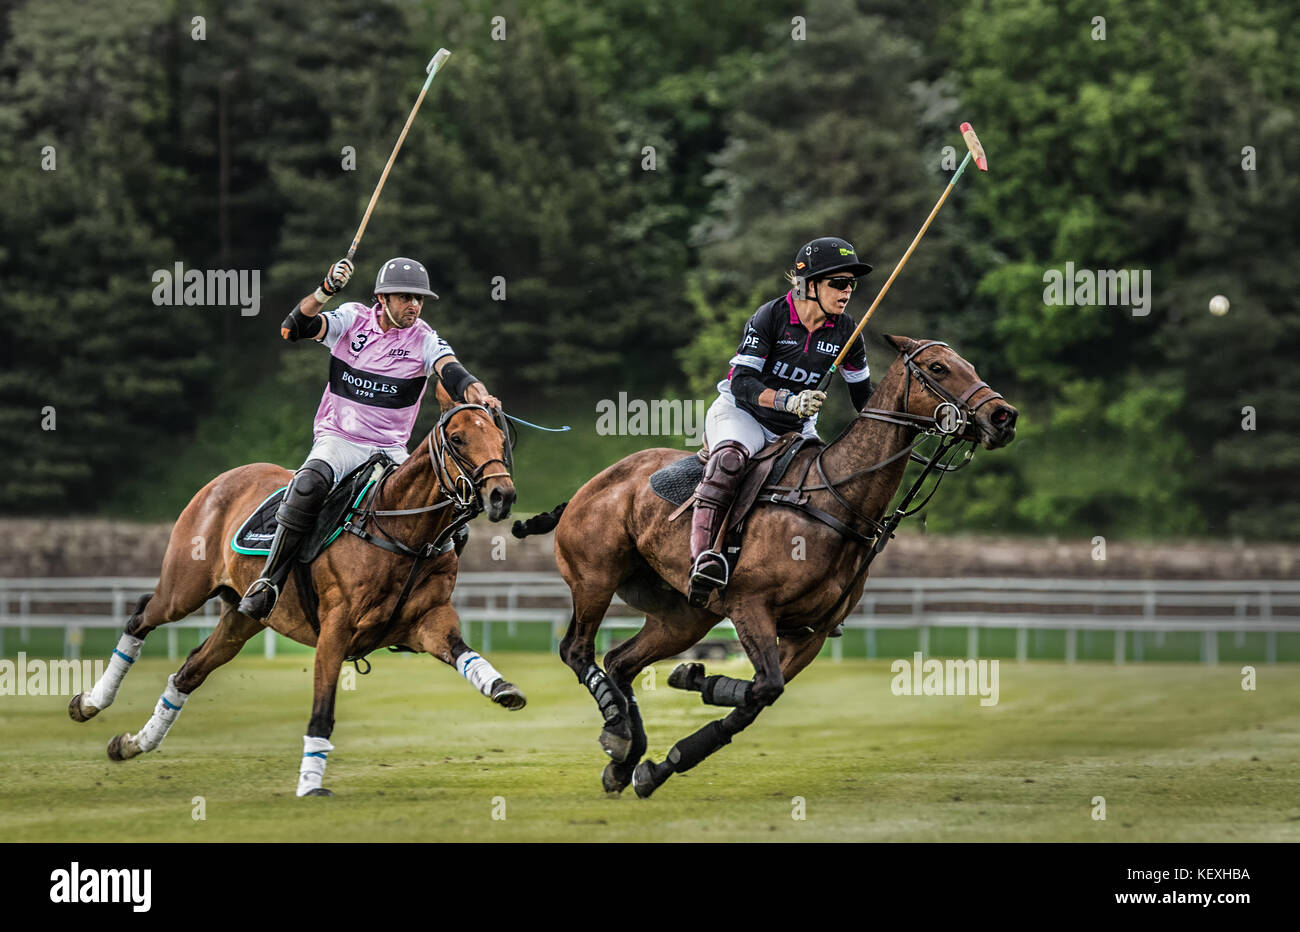 Polo Match at Chester Race Course, Chester, Cheshire, England, UK Stock Photo